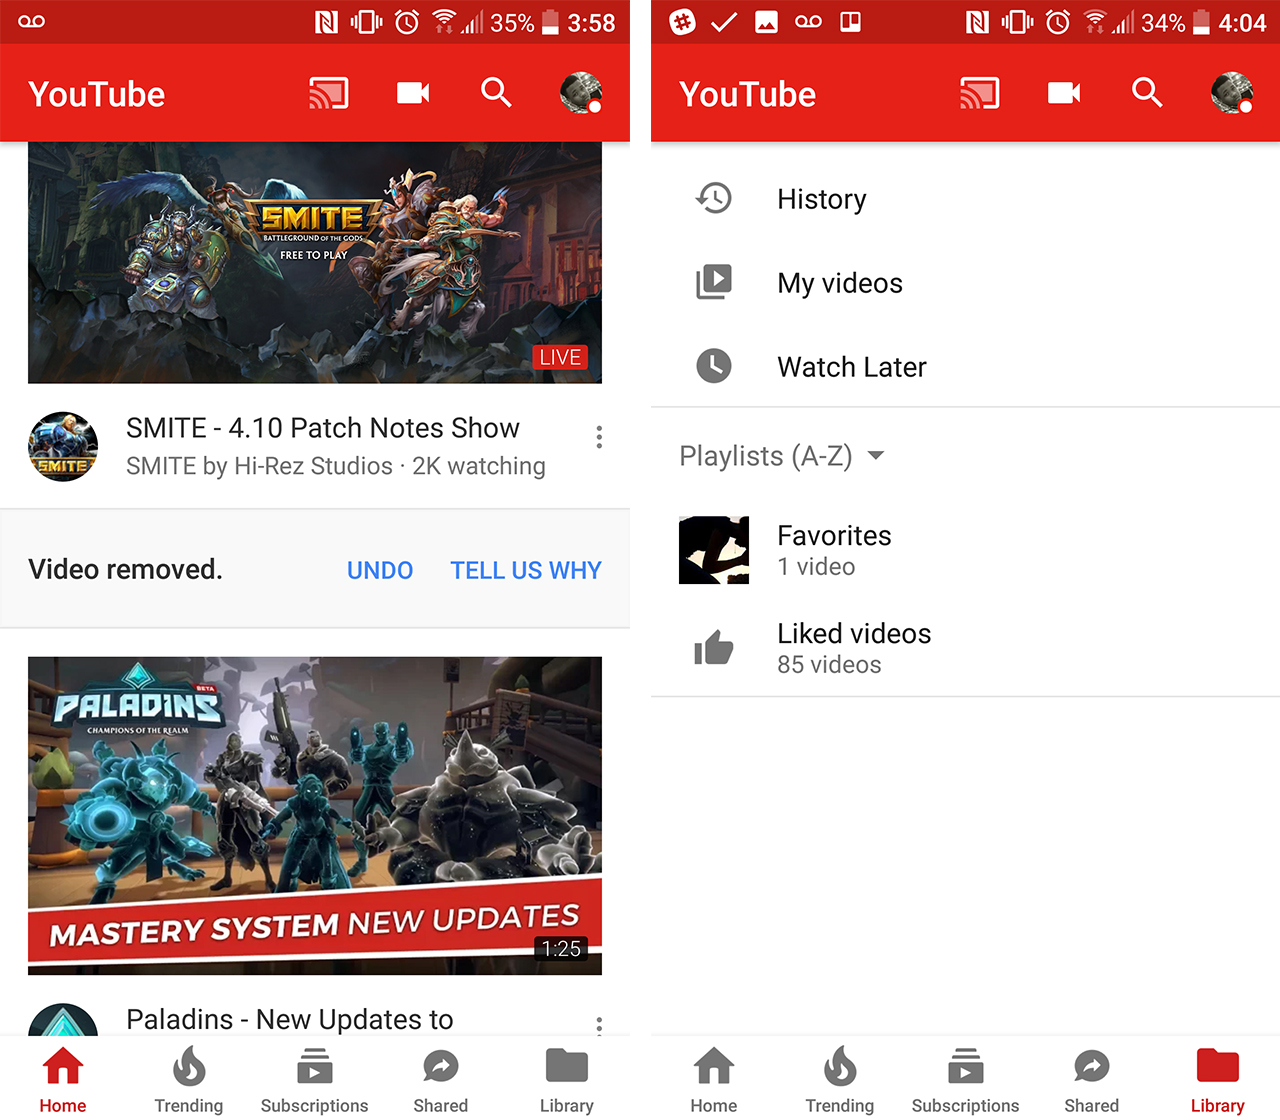 YouTube redesigned apps